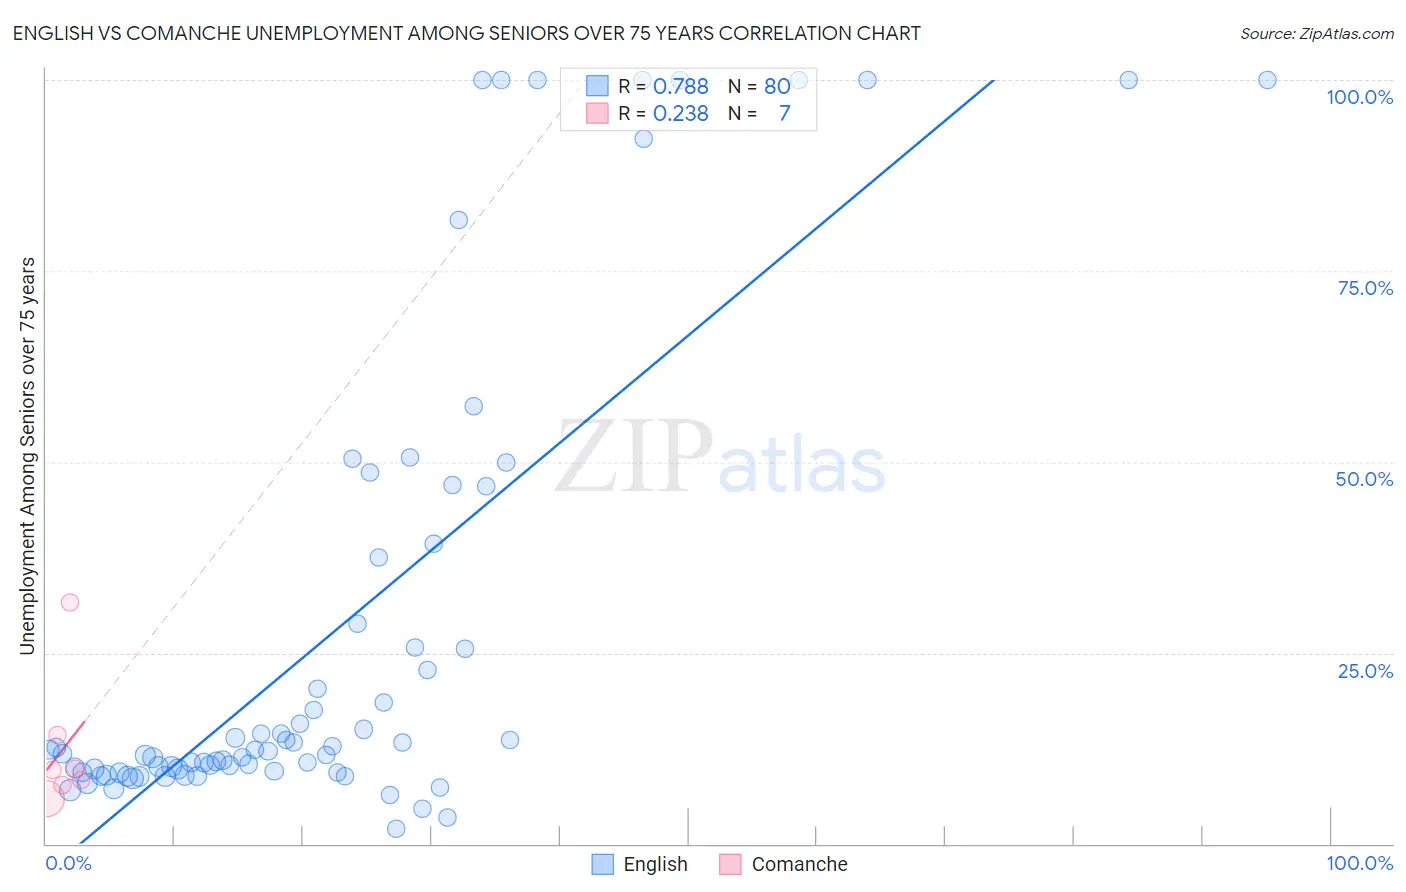 English vs Comanche Unemployment Among Seniors over 75 years